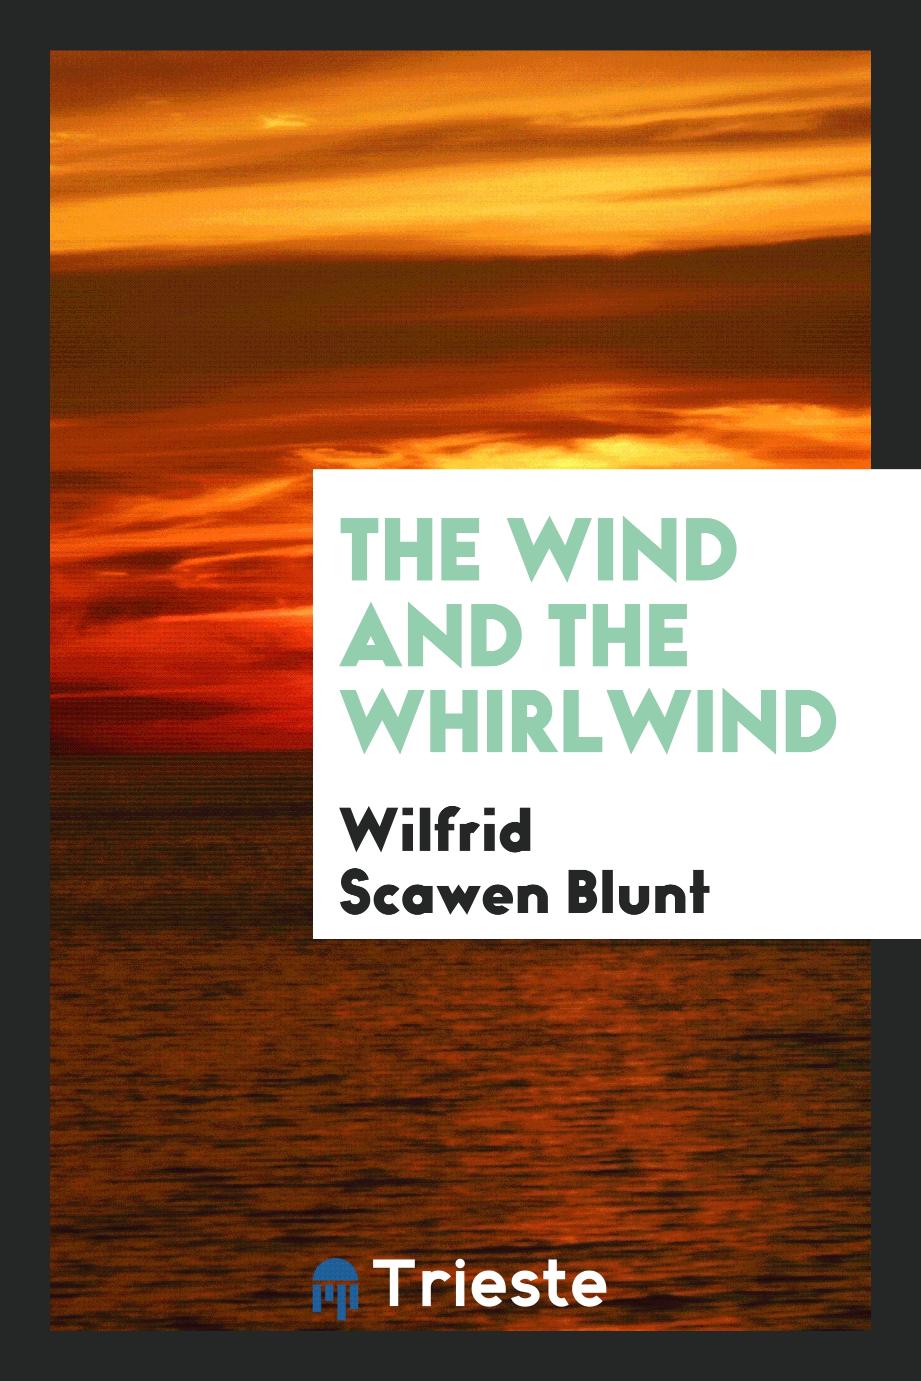 The Wind and the Whirlwind